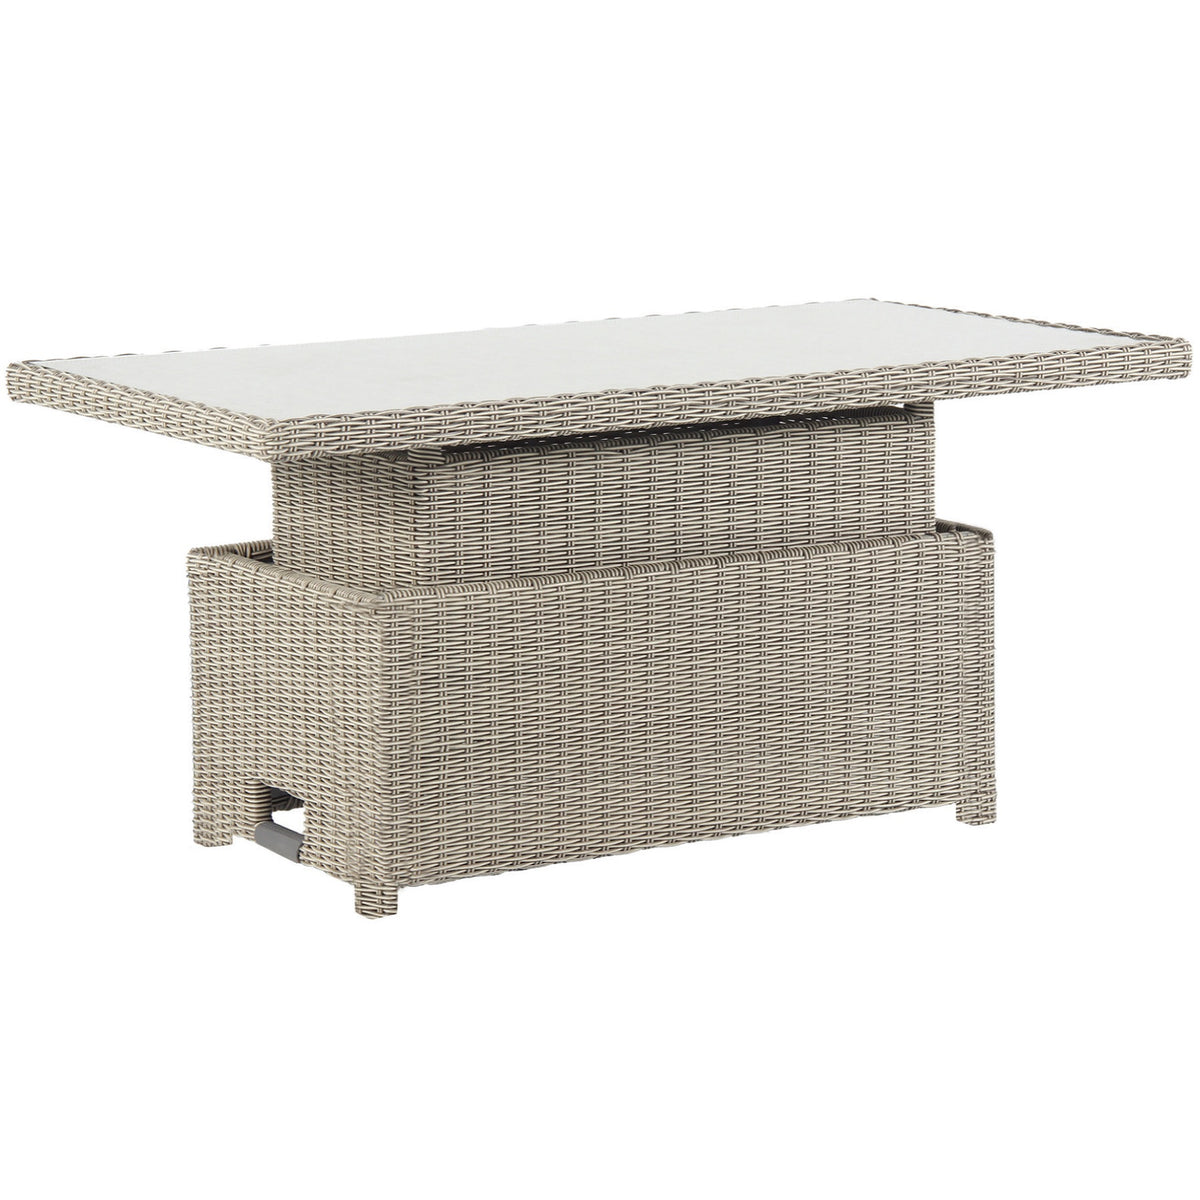 Kettler Palma Signature White Wash Wicker High Low Adjustable Glass Top Table